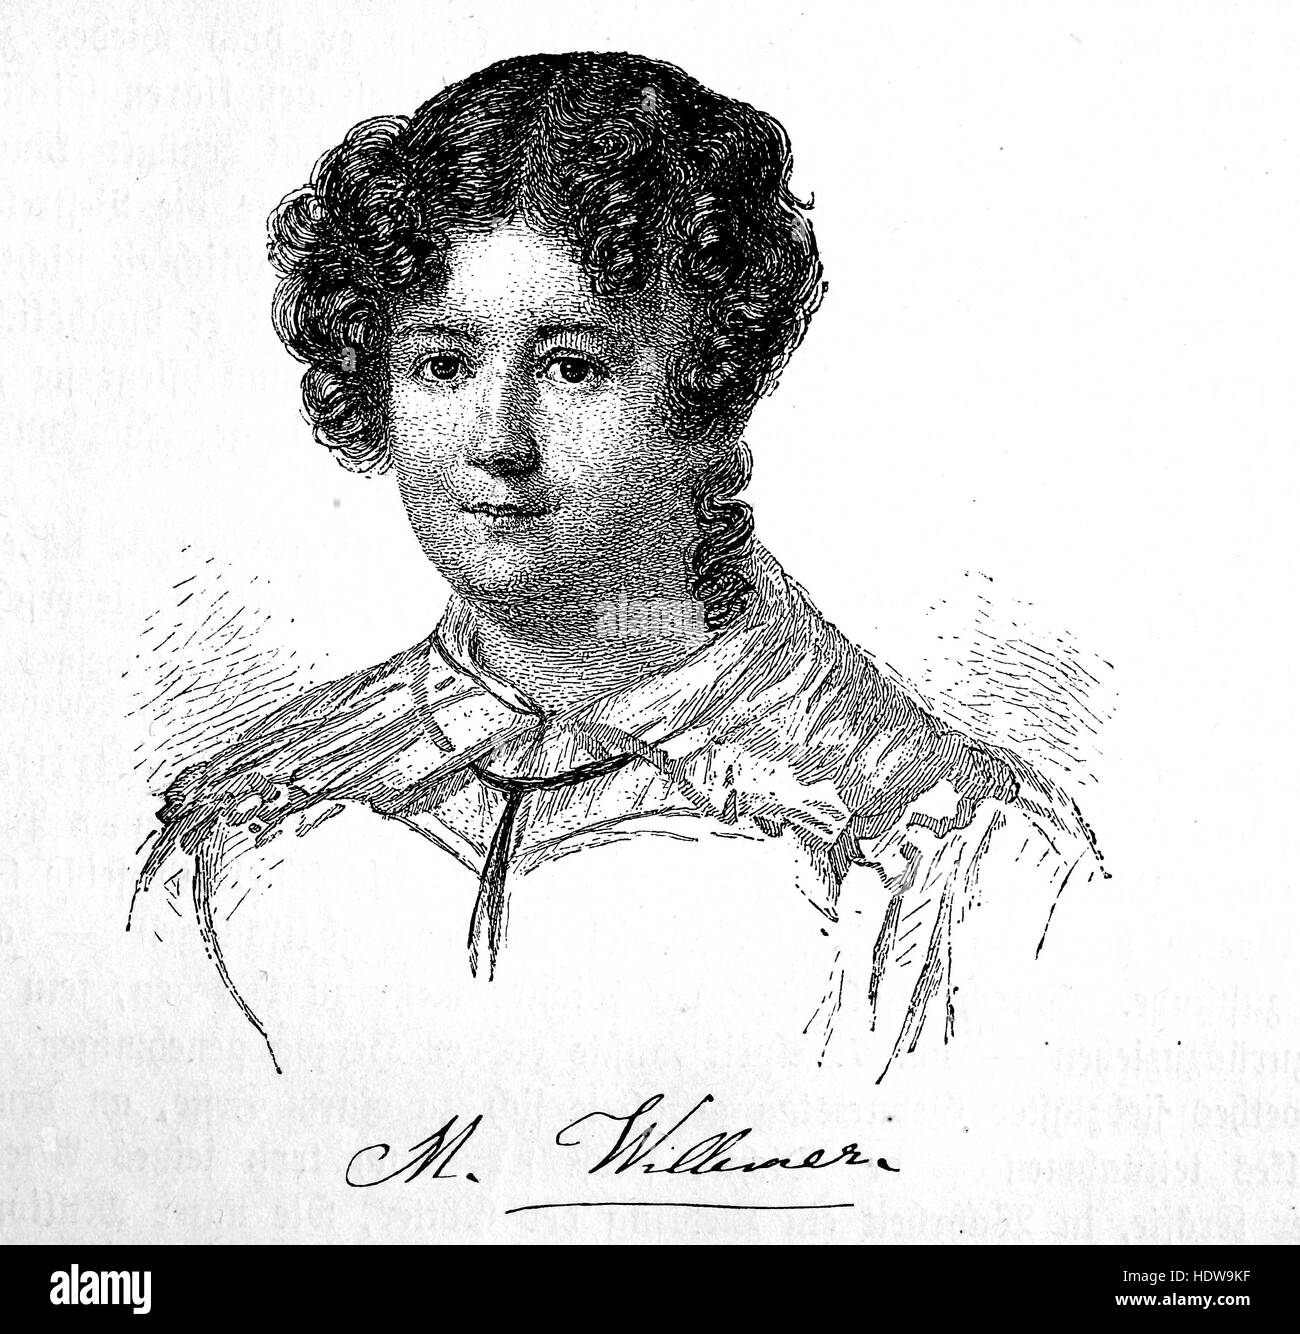 Marianne von Willemer, 1784-1860, probably born as Marianne Pirngruber, also known as Marianne Jung, an Austrian actress and dancer, woodcut from the year 1880 Stock Photo